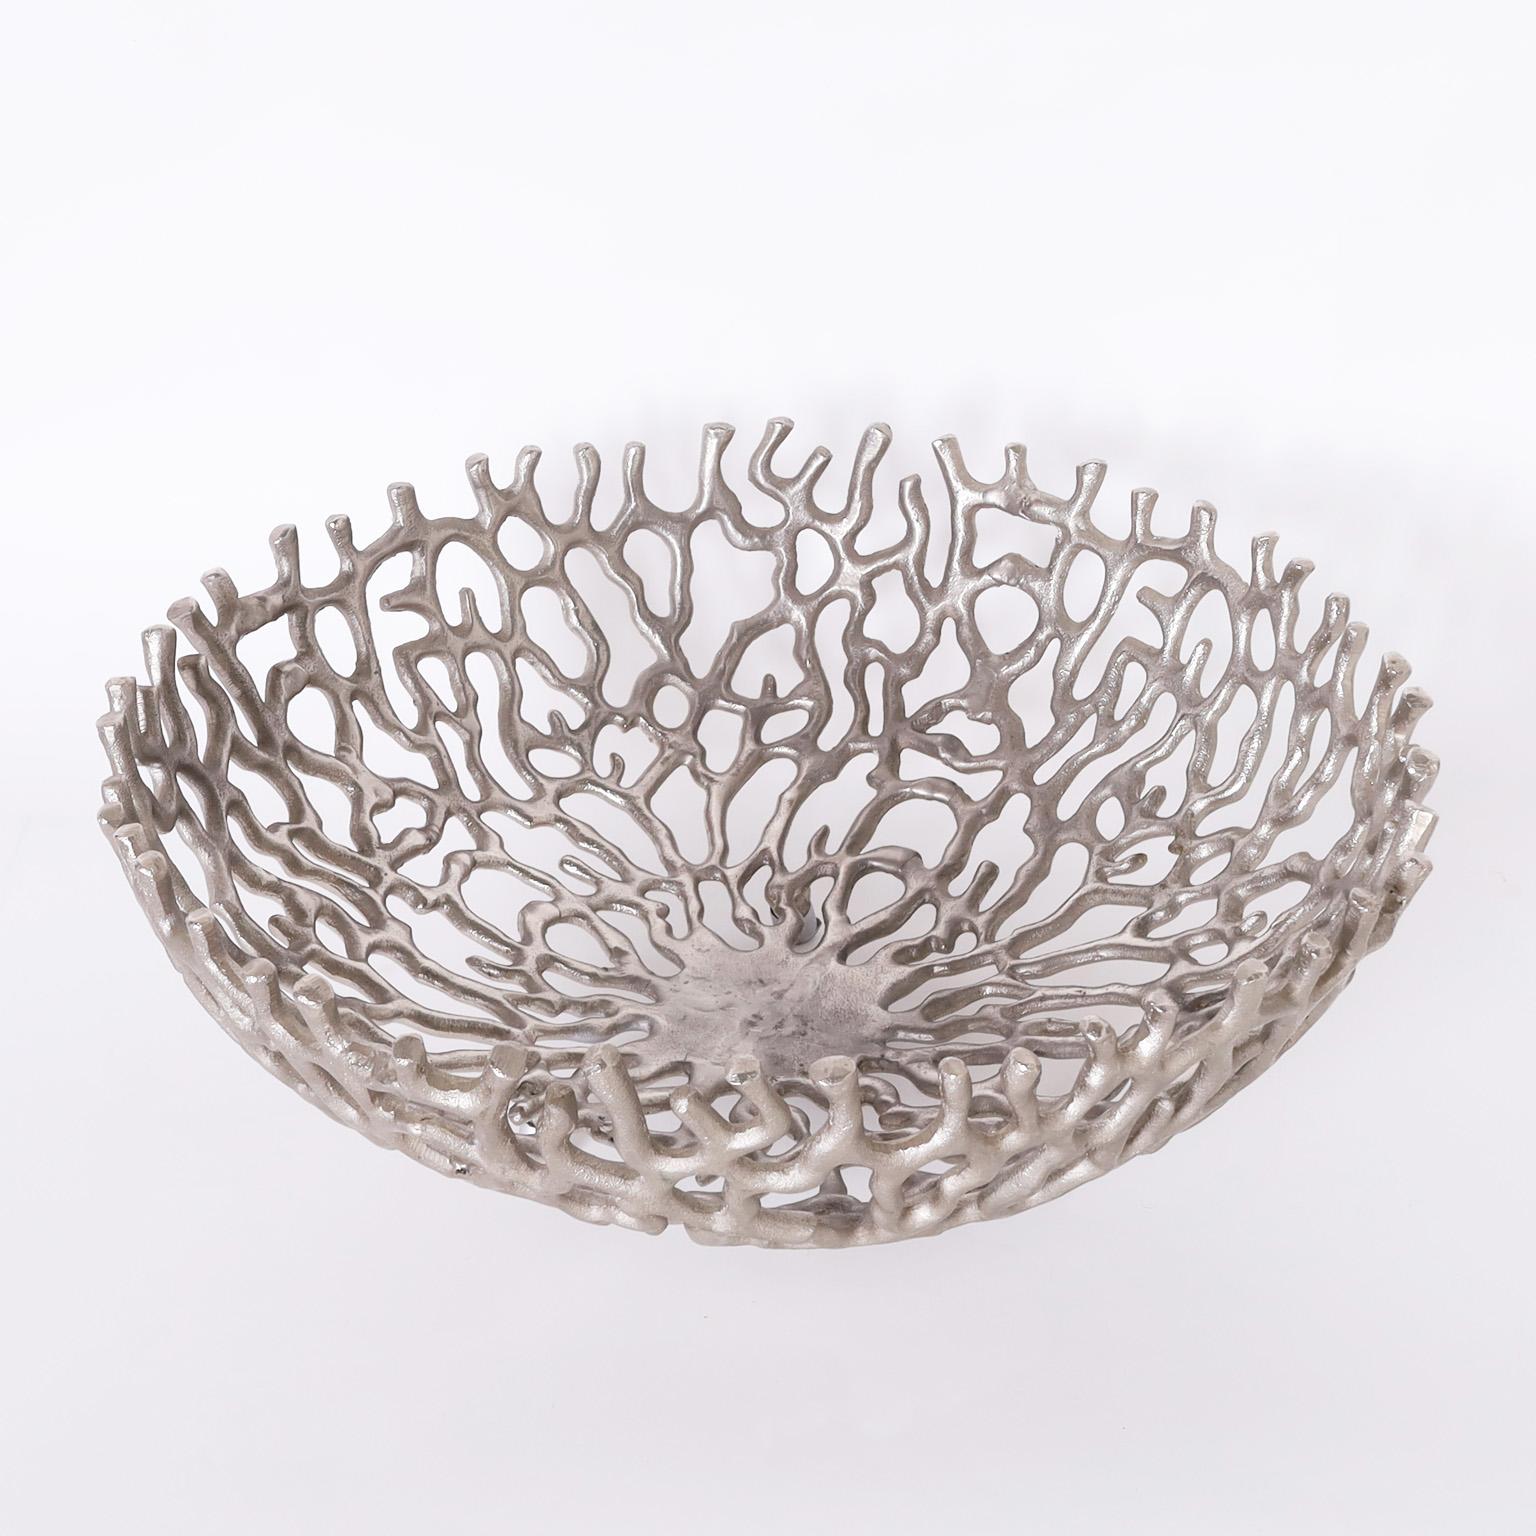 Chic modern style fruit bowl crafted in cast aluminum with a bold faux coral composition.